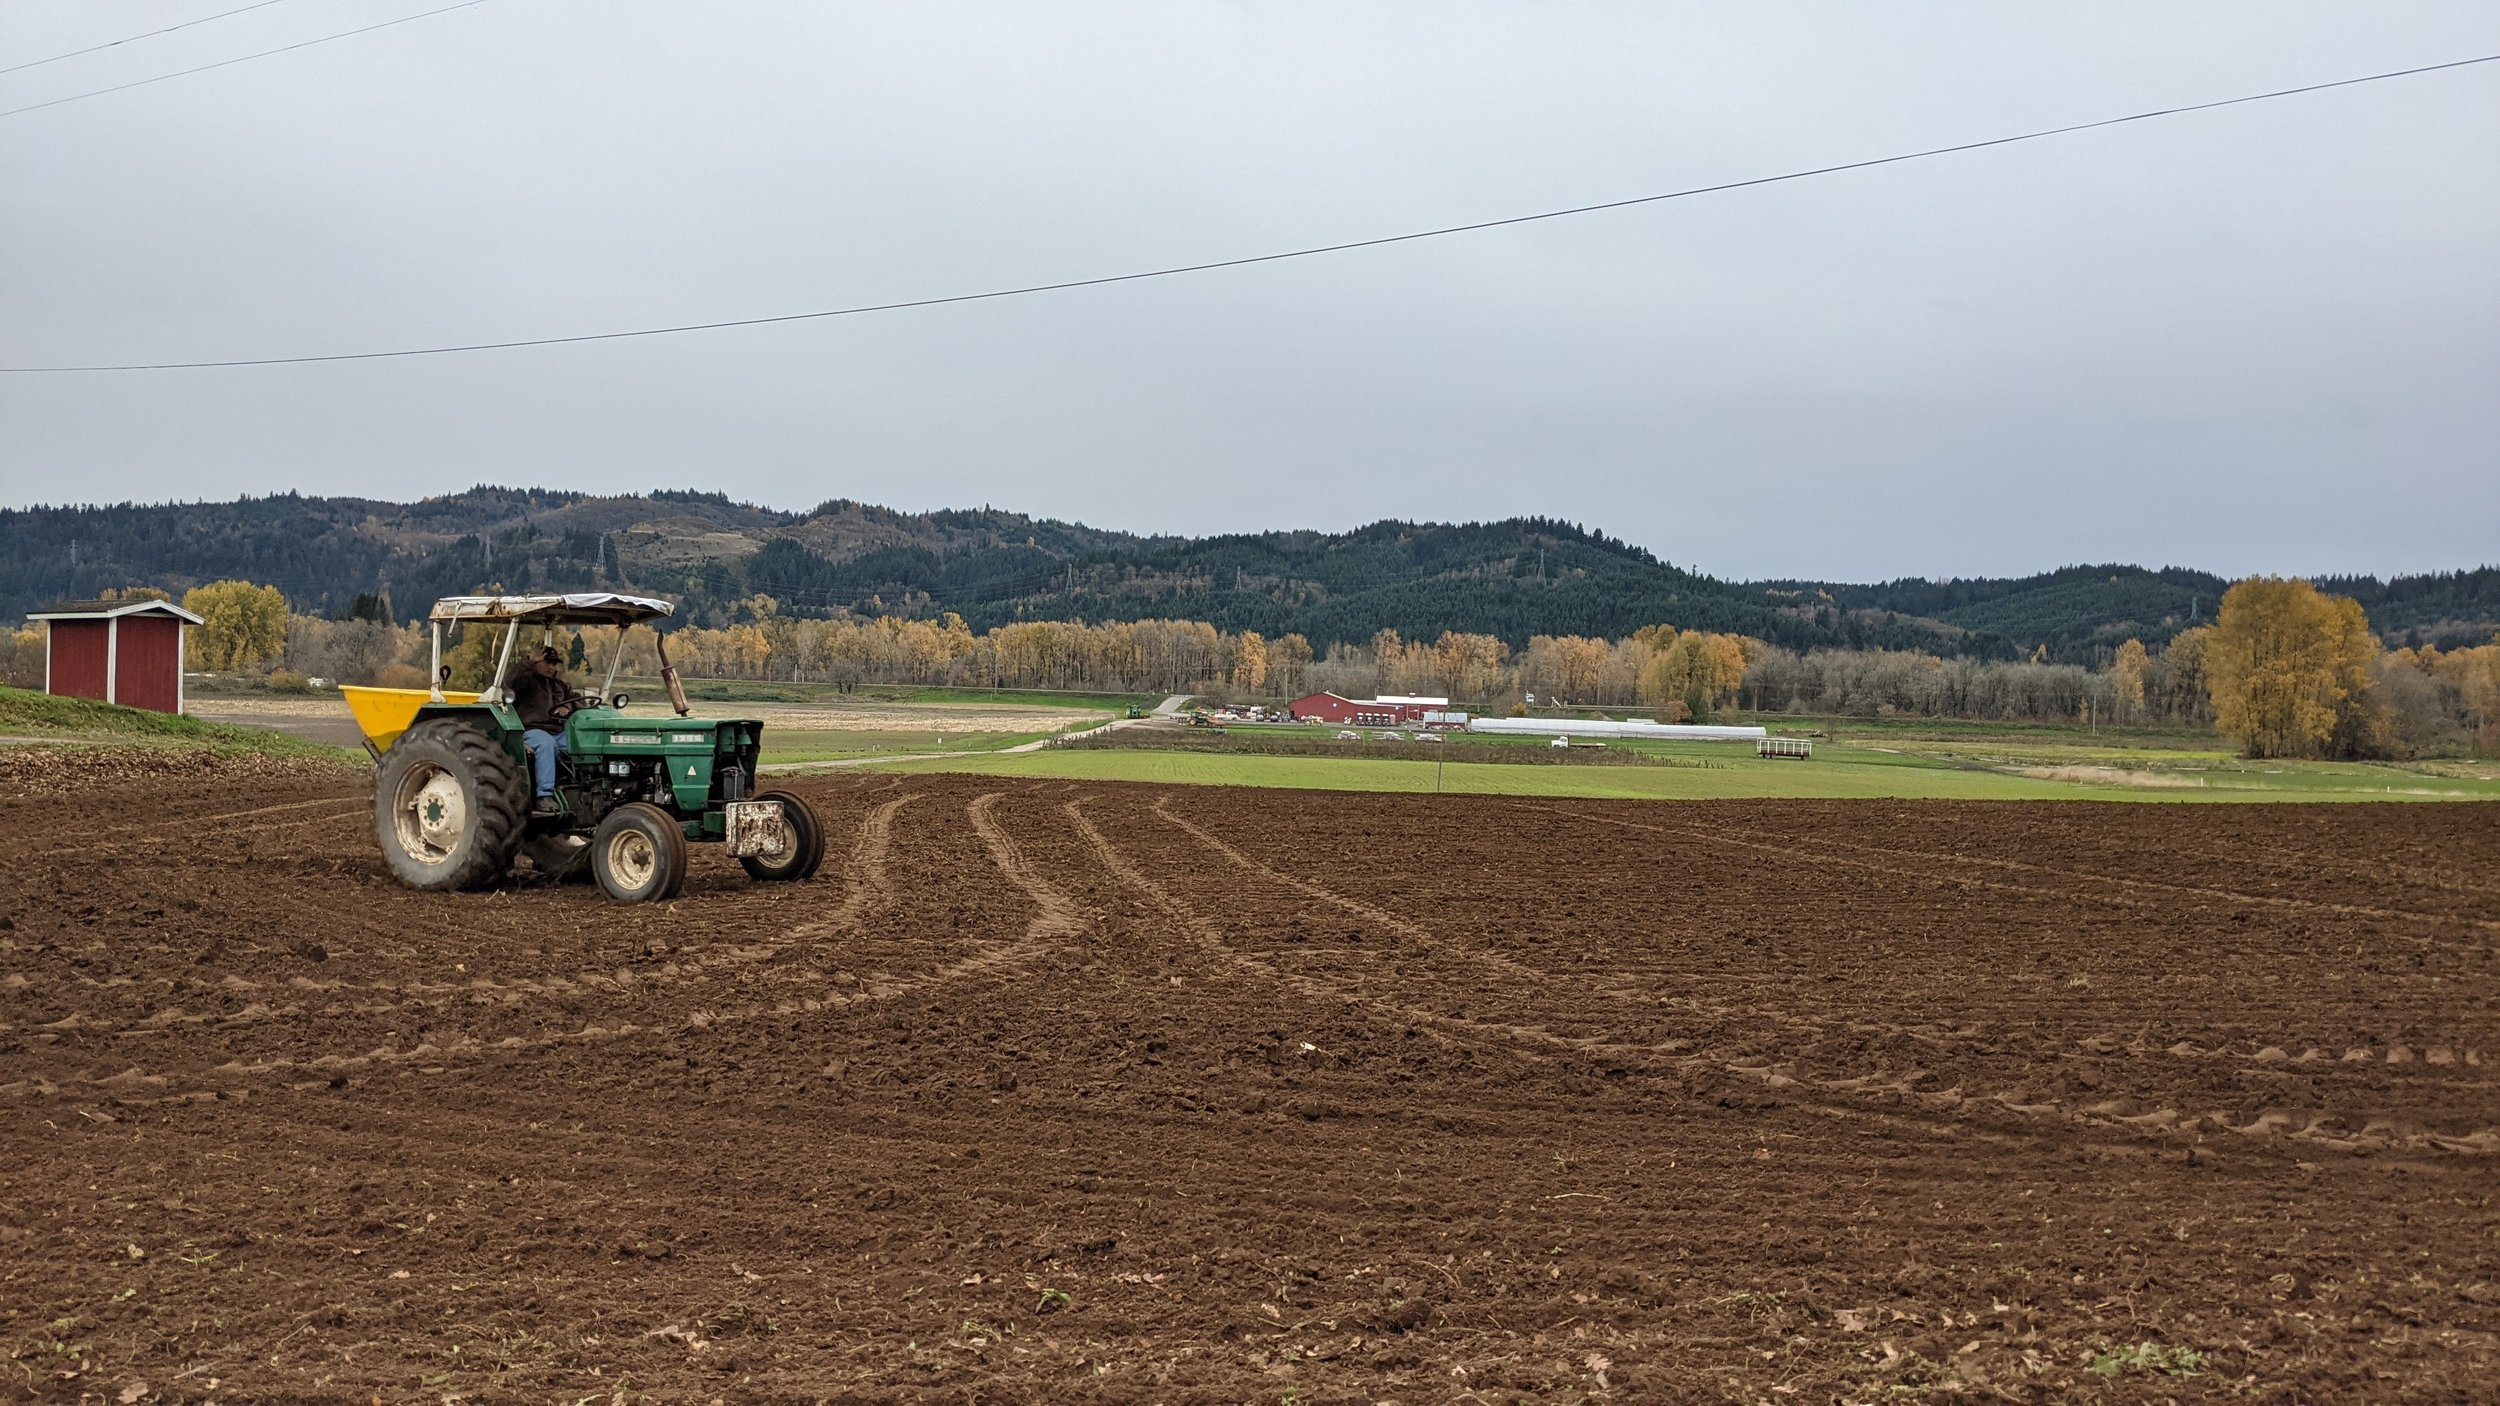  Planting cover crops. Our goal is to cover every field. The challenge is getting to all the fields before it is too wet. 